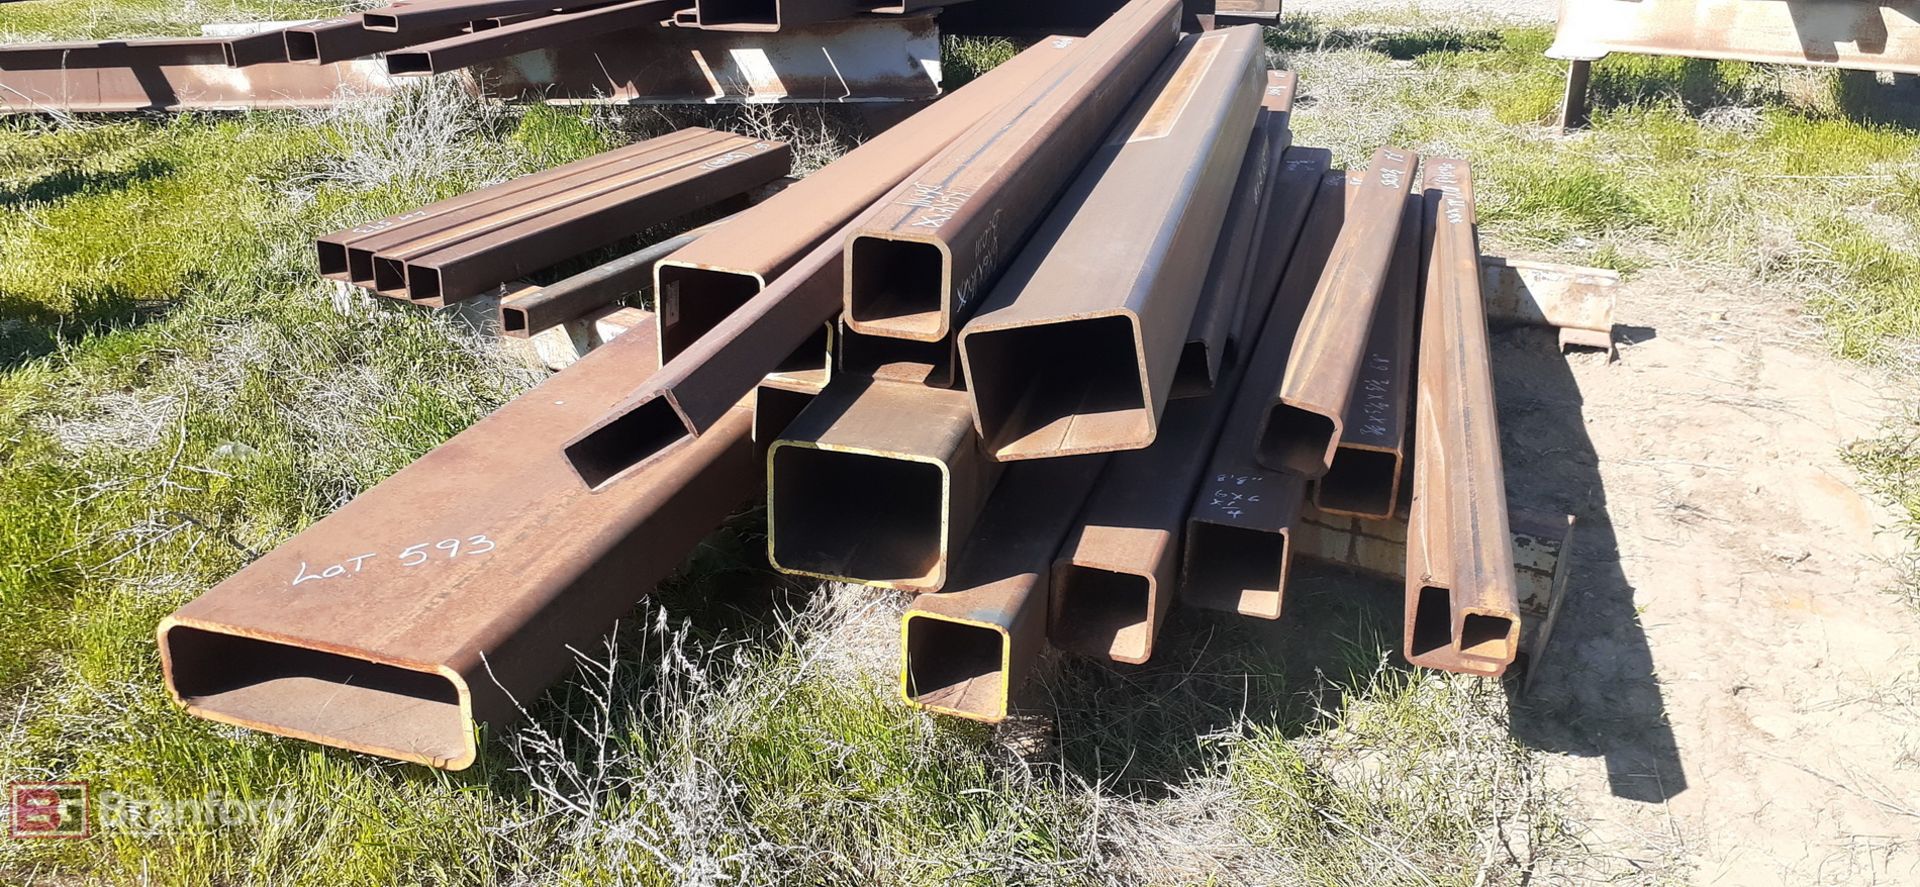 Lot of Tube Steel Stock - Image 3 of 4